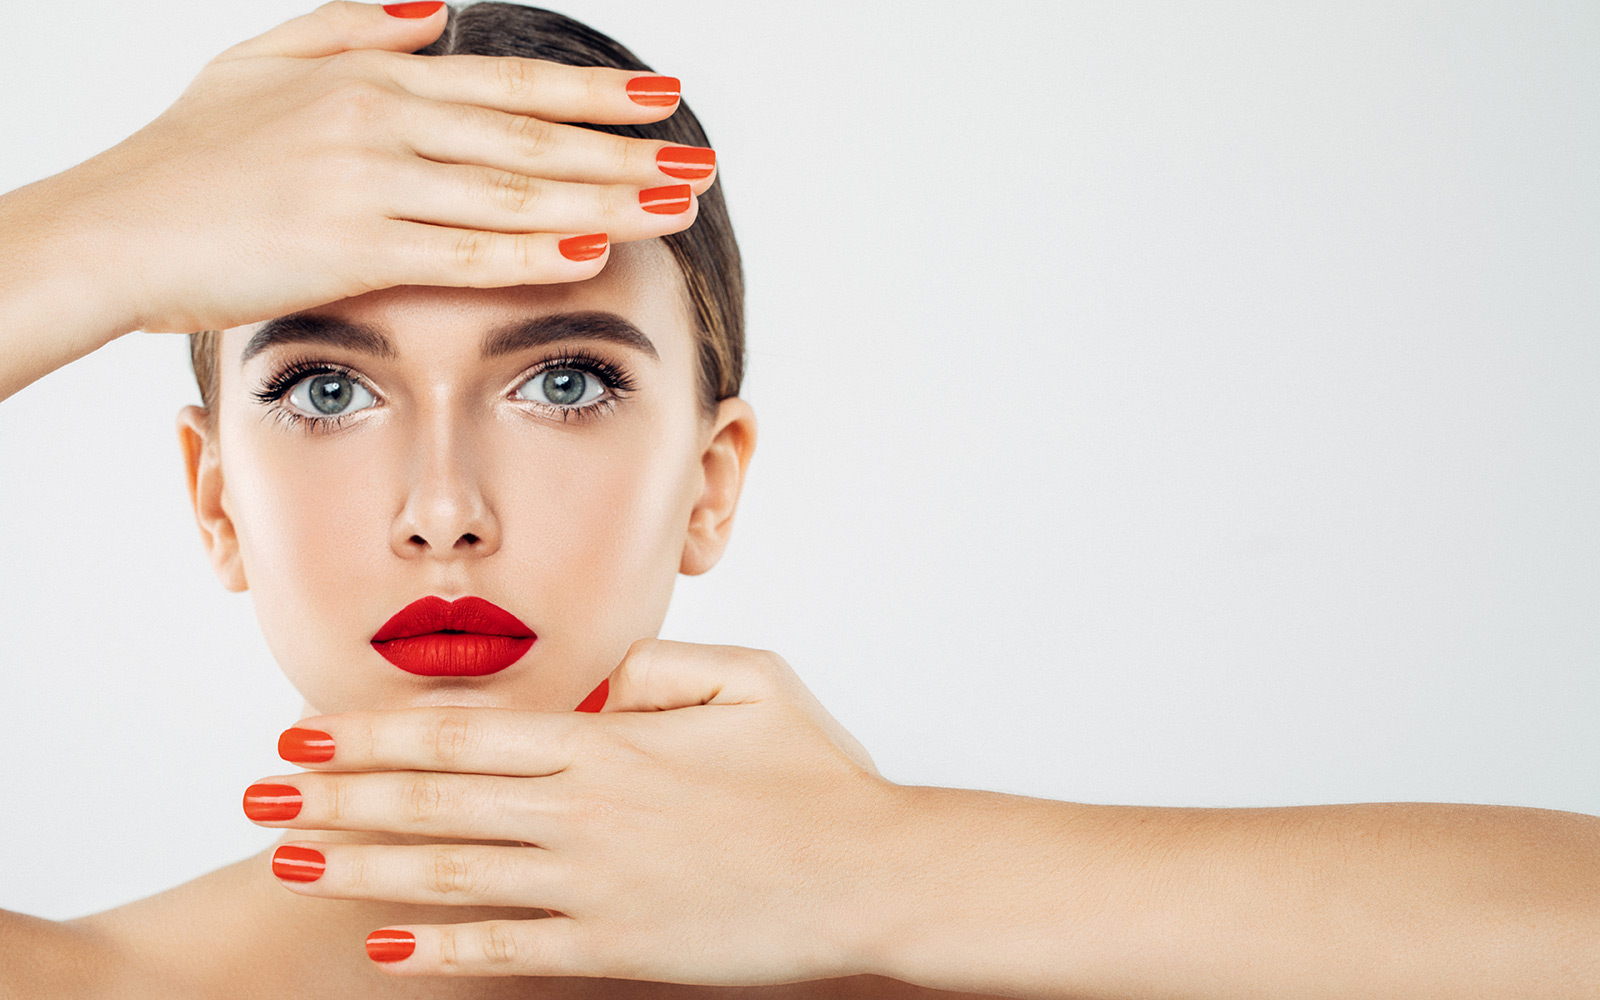 Dermal Fillers: The Secret to Younger Looking Hands